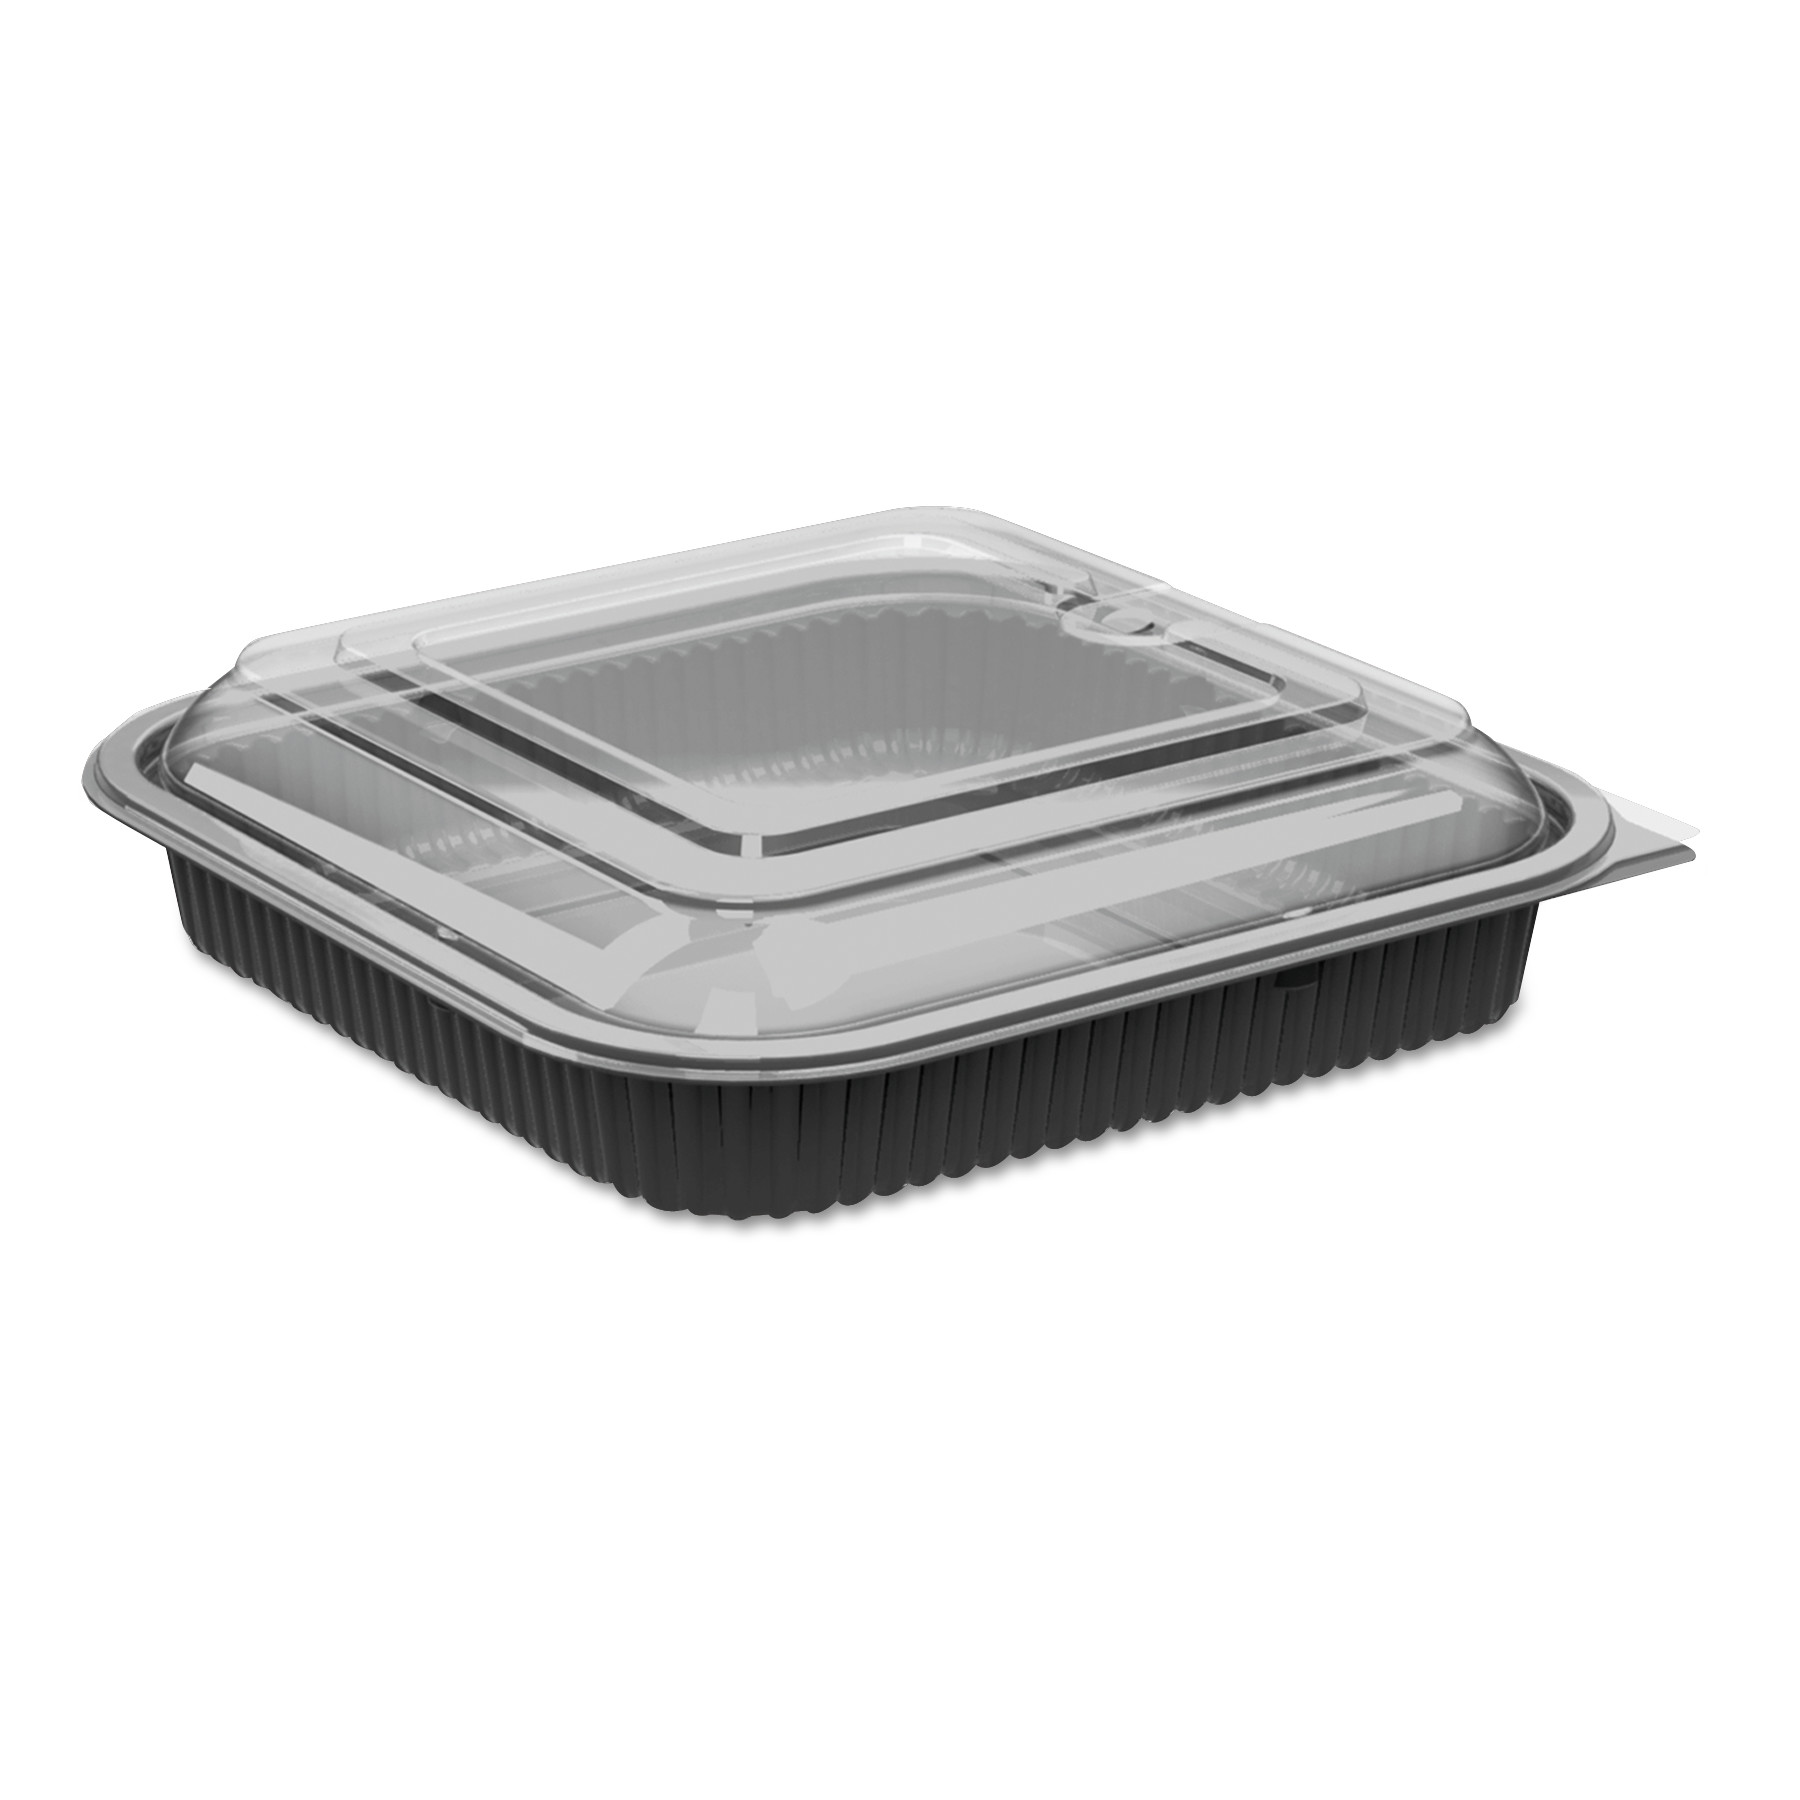  Anchor Packaging 4118521 Culinary Squares 2-Piece Microwavable Container, 36 oz, Clear/Black, 8.46 x 8.46 x 2.25,150/Carton (ANZ4118521) 